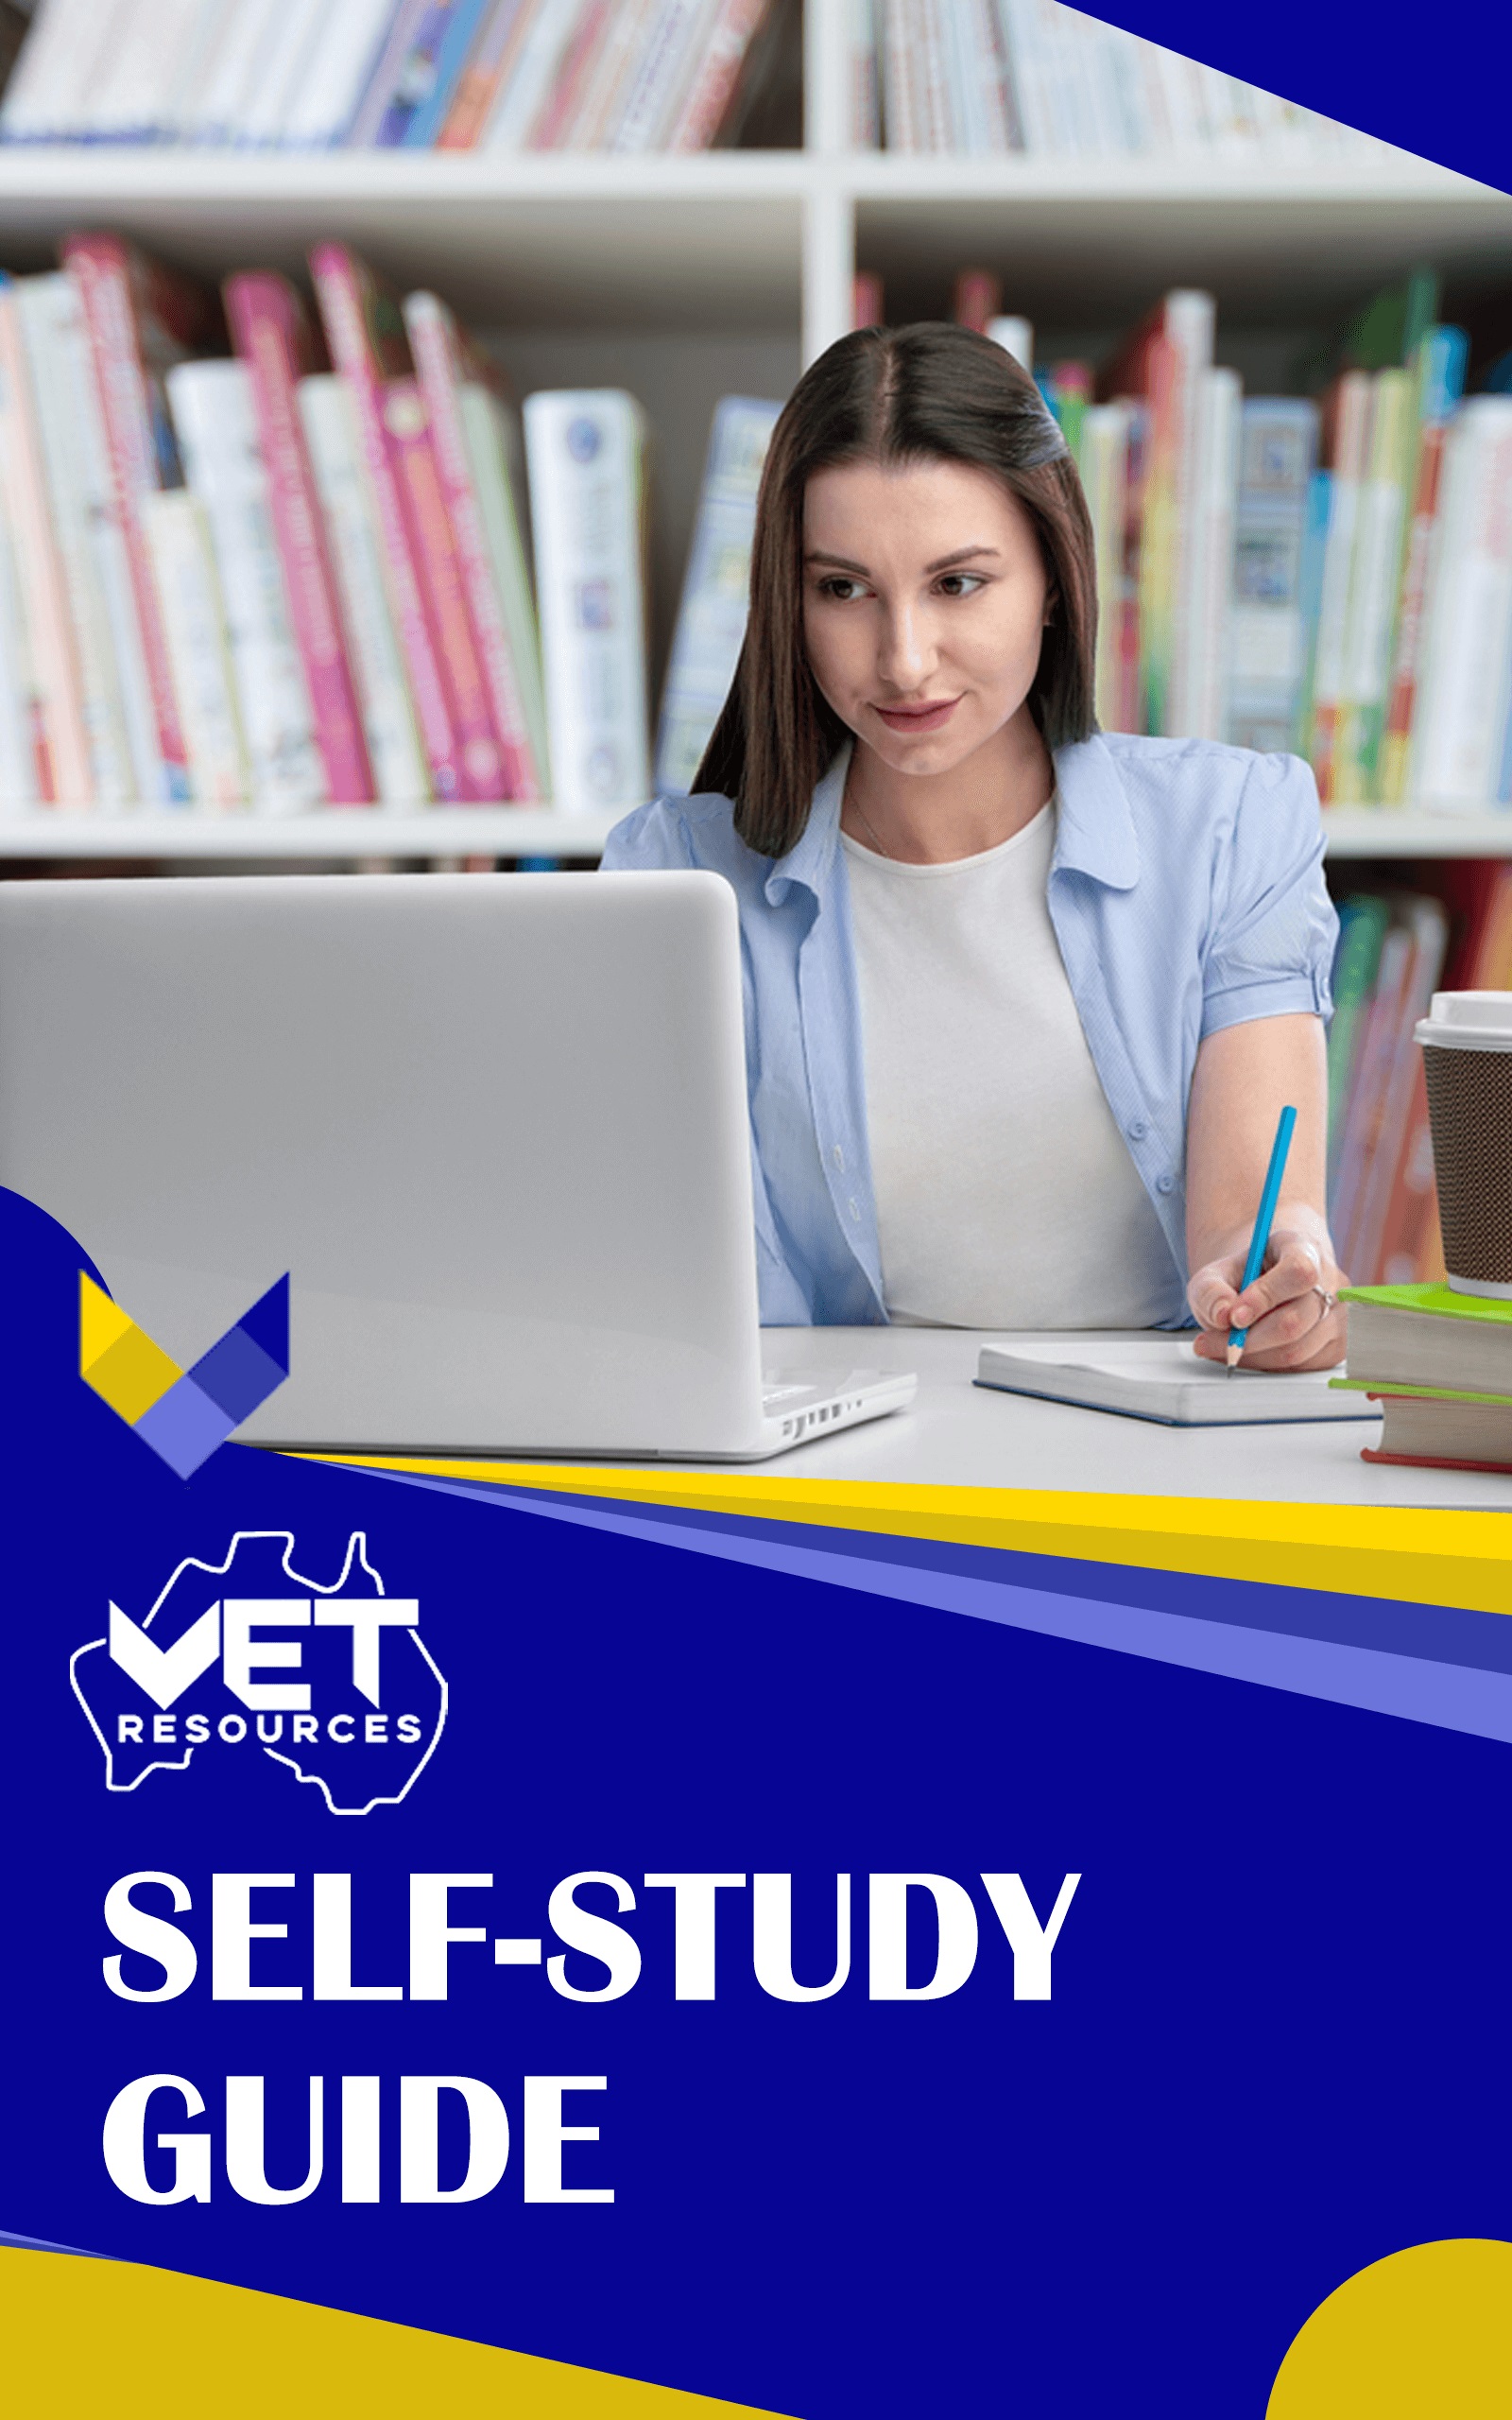 Self-Study Guide - SITEEVT031 - Determine event feasibility